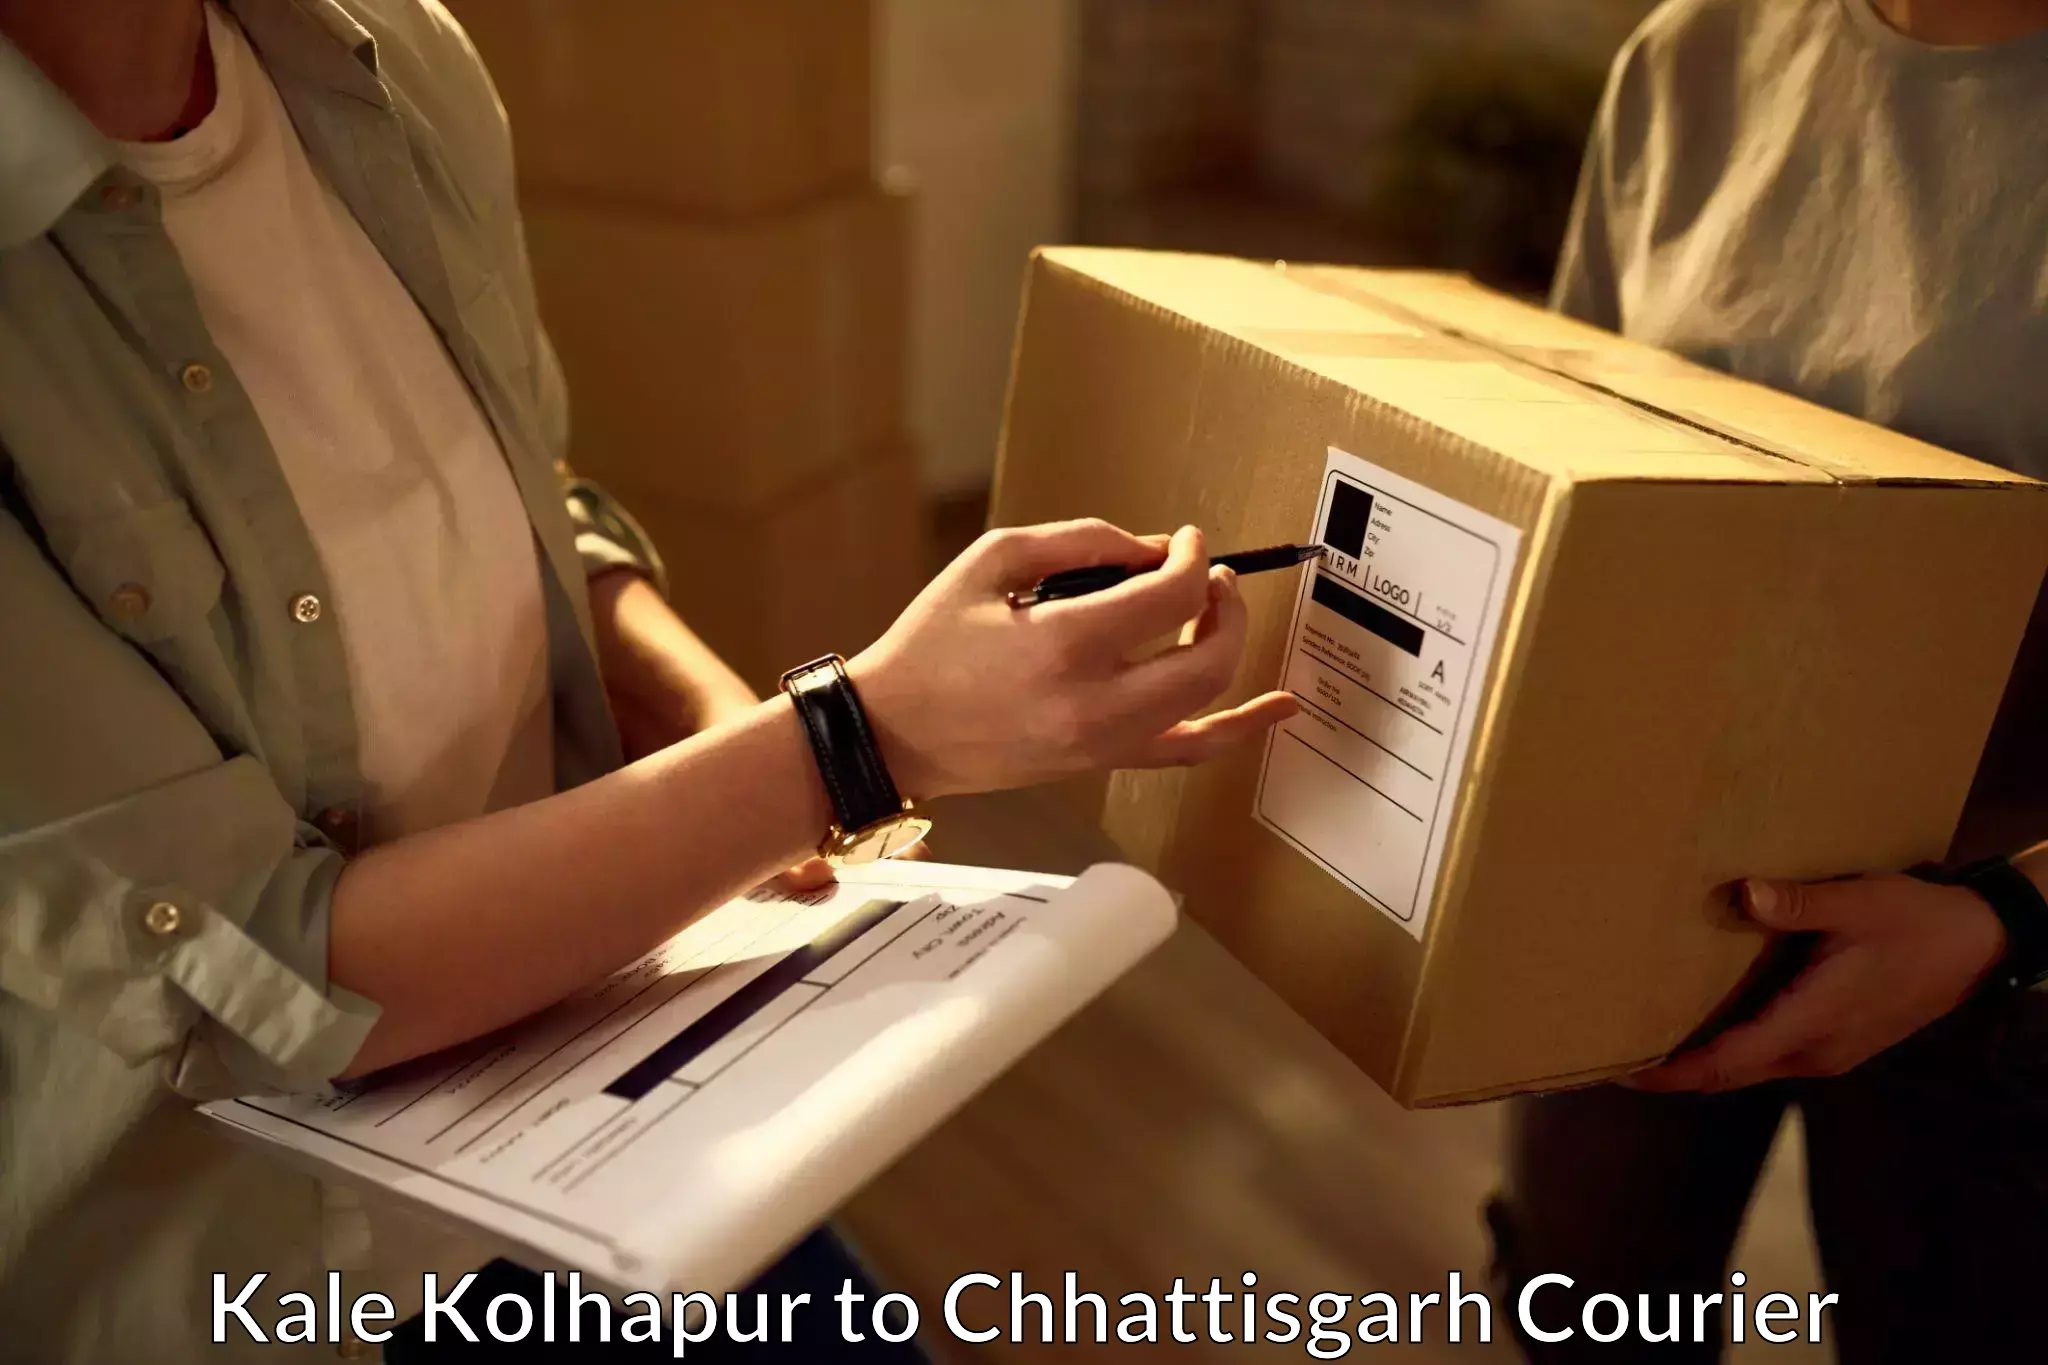 Easy access courier services Kale Kolhapur to Chirimiri